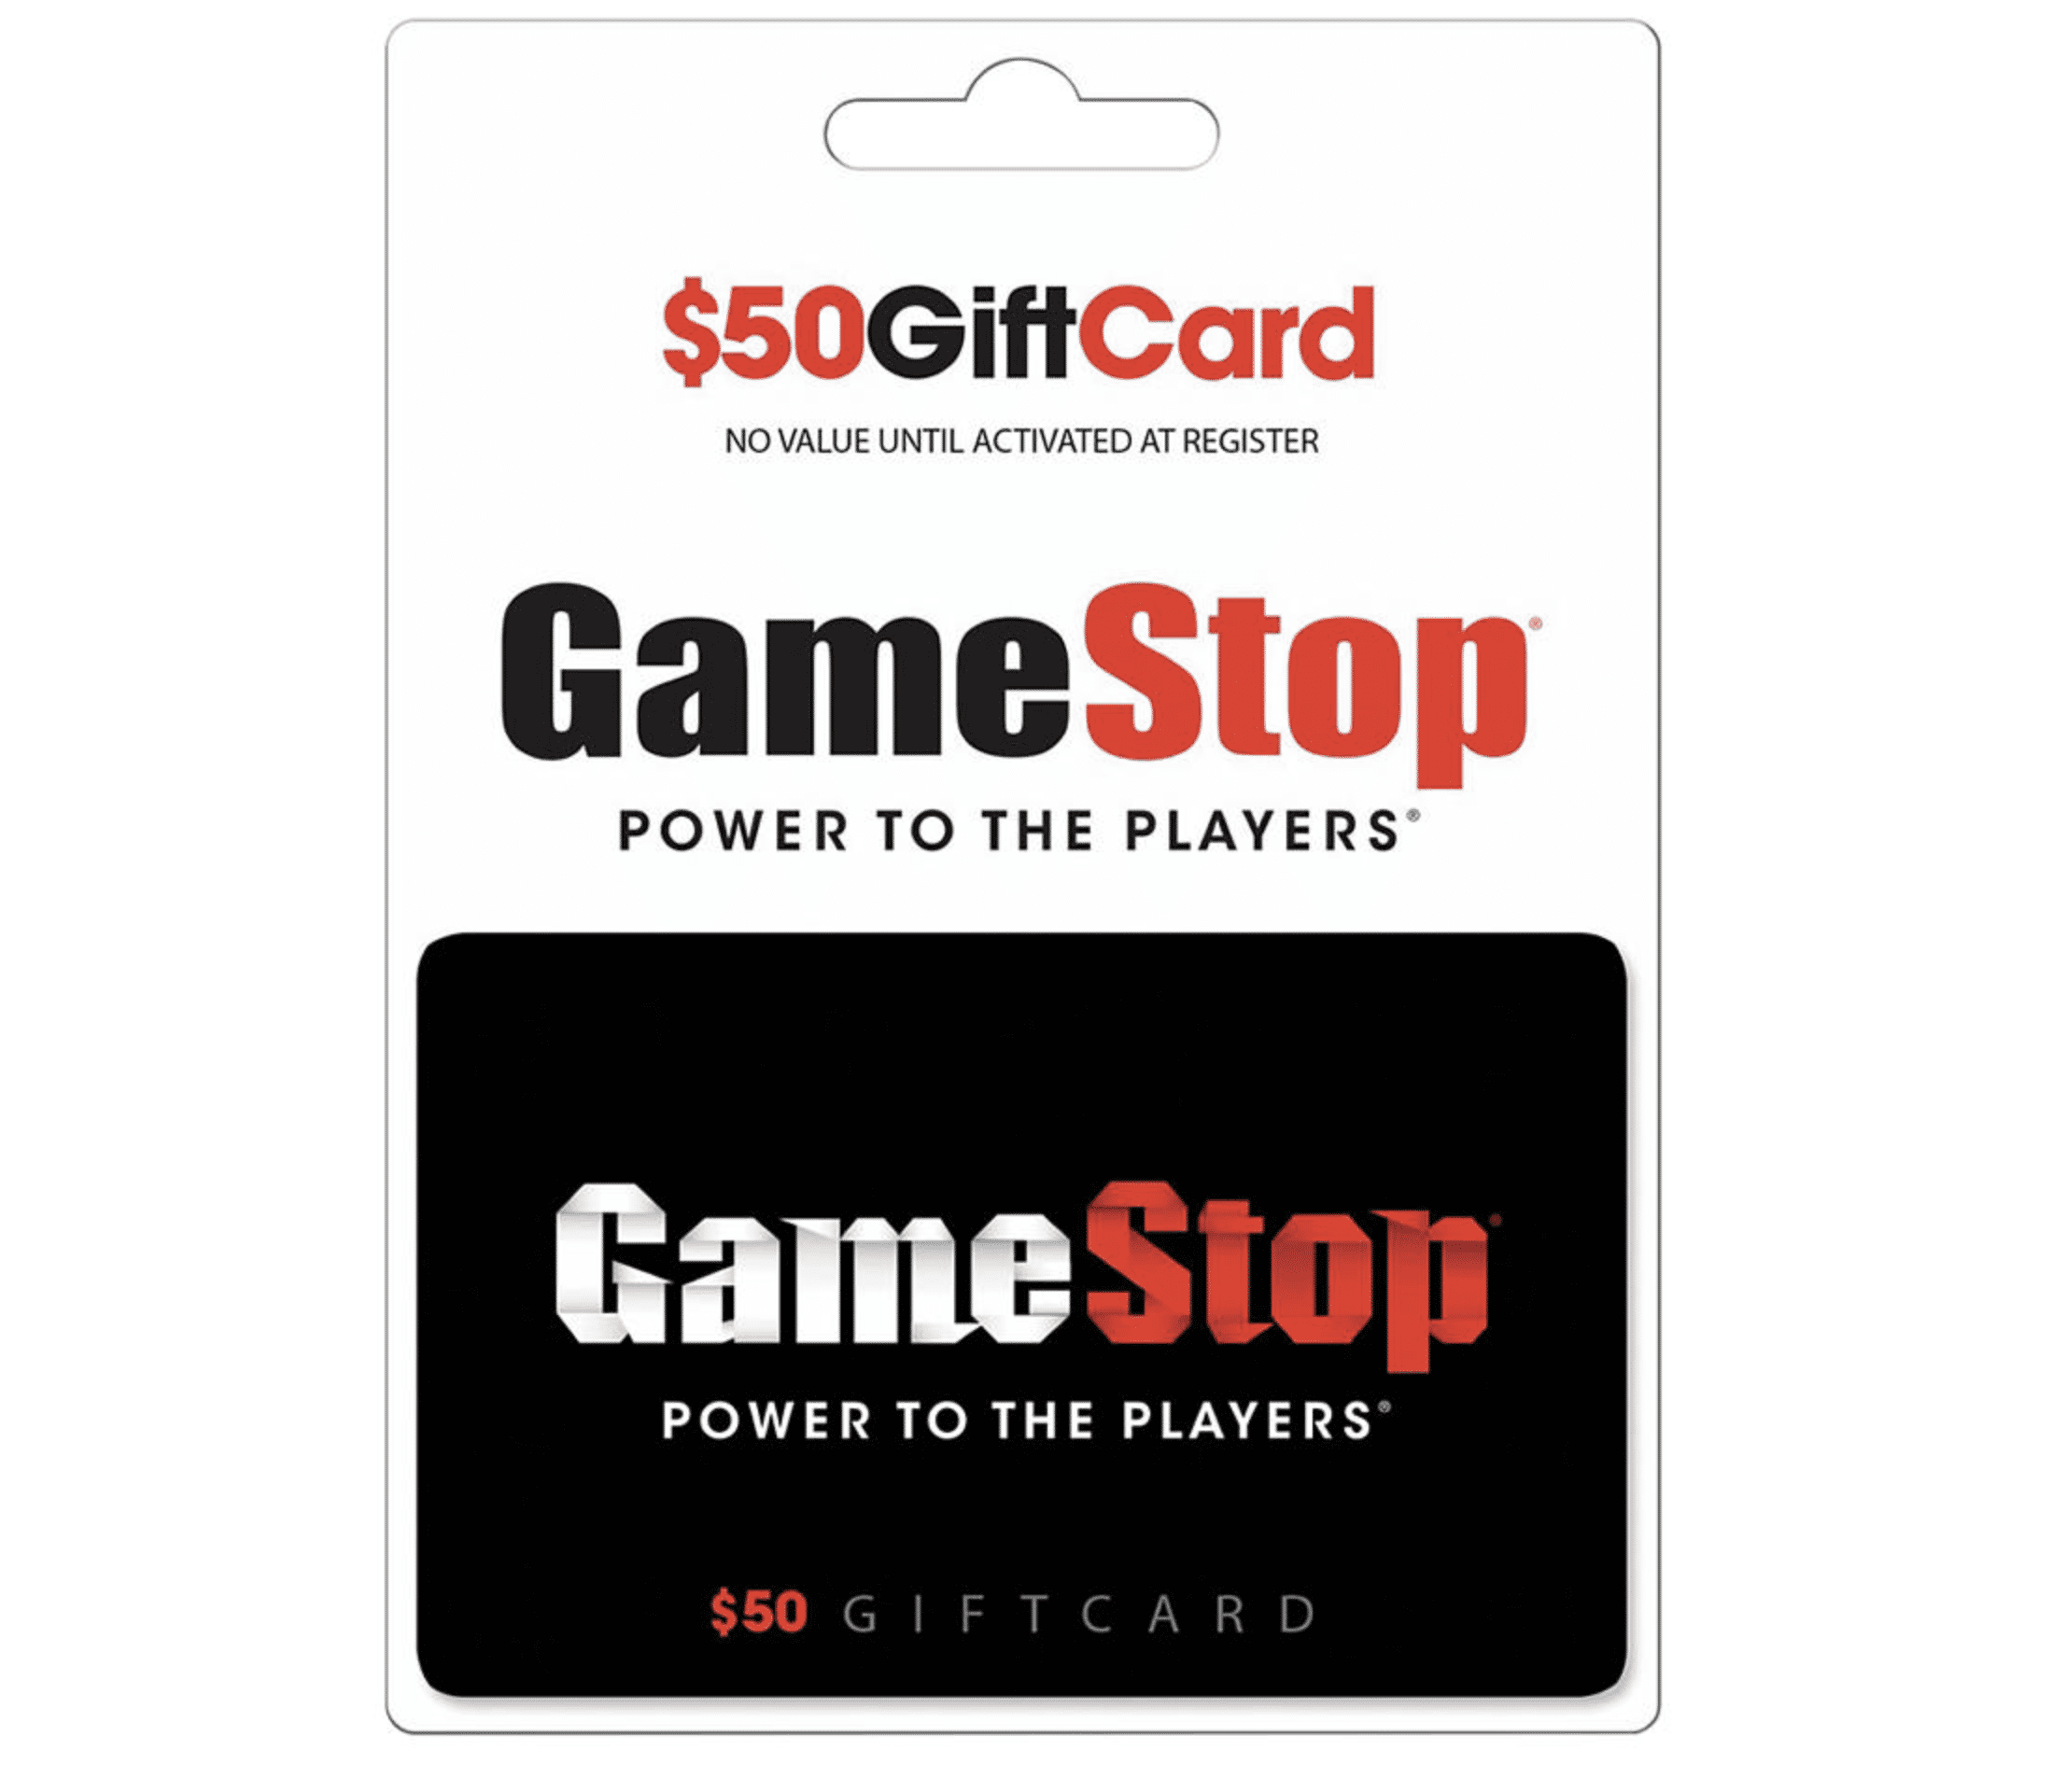 $50 Gamestop Gift Card only $39.99 at BJ’s